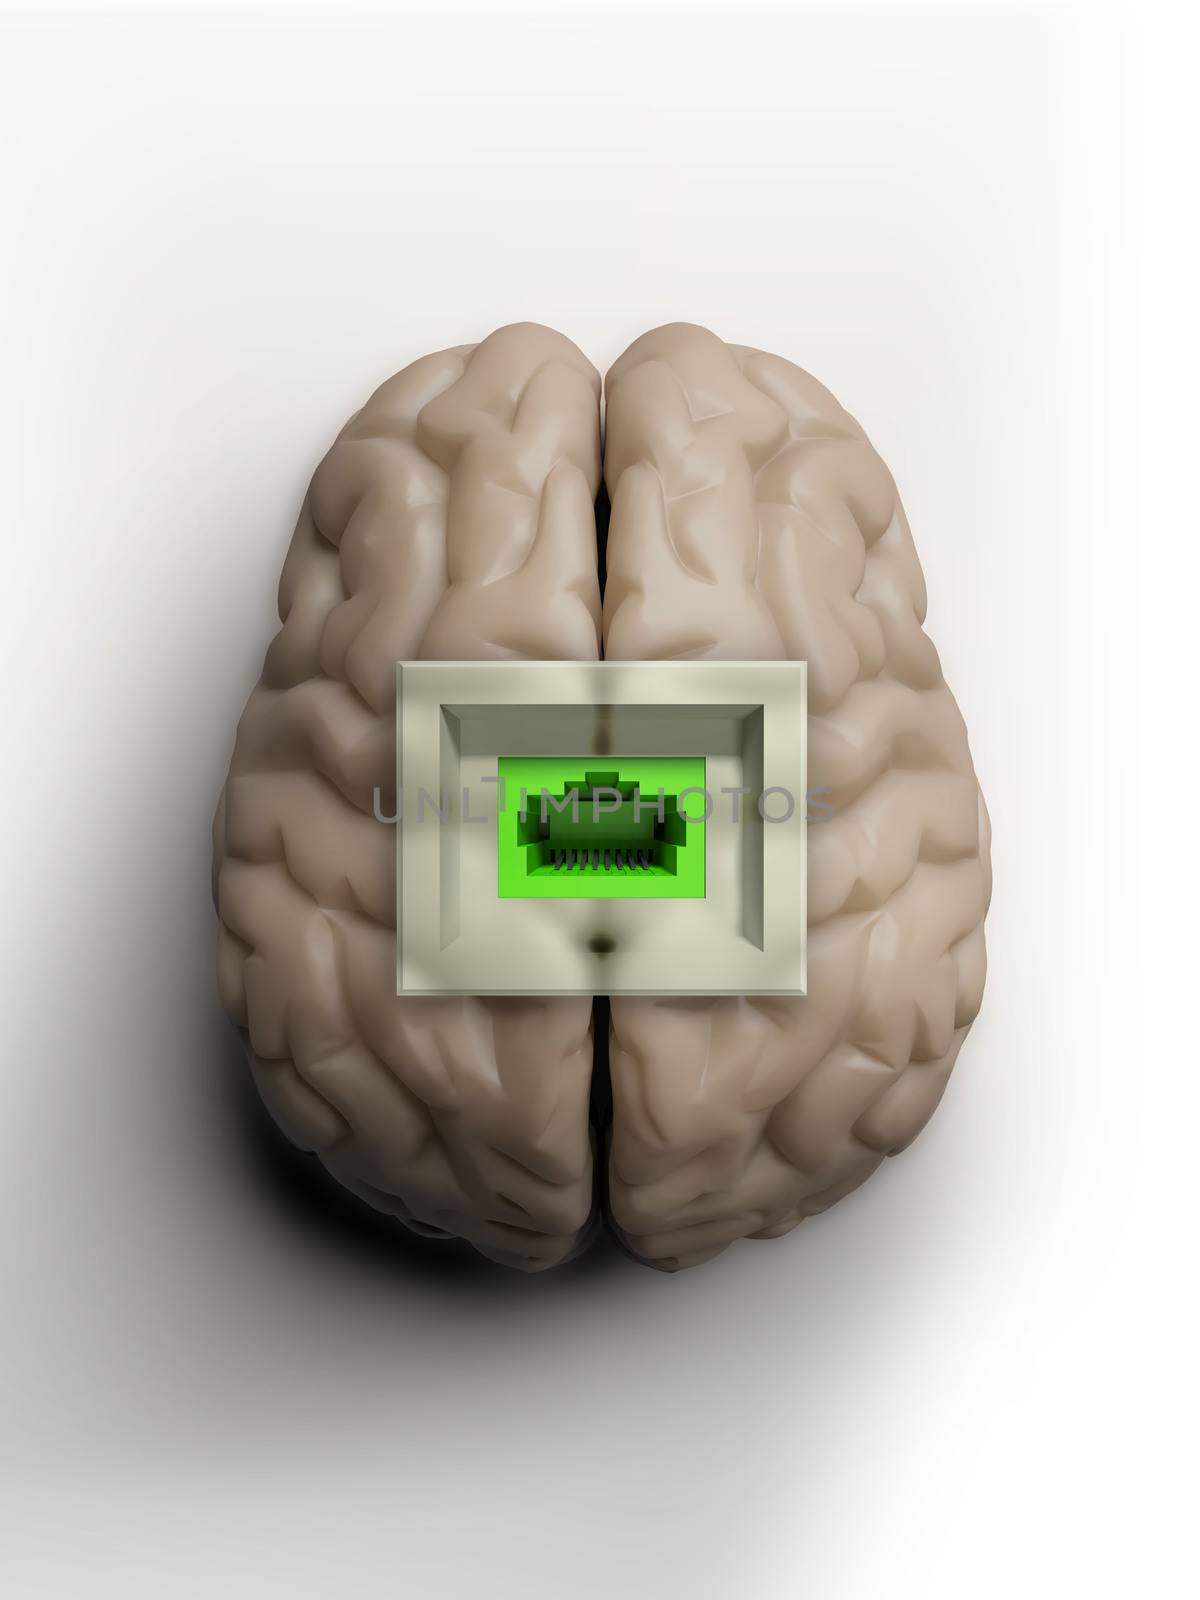 The human brain connection by Lixell